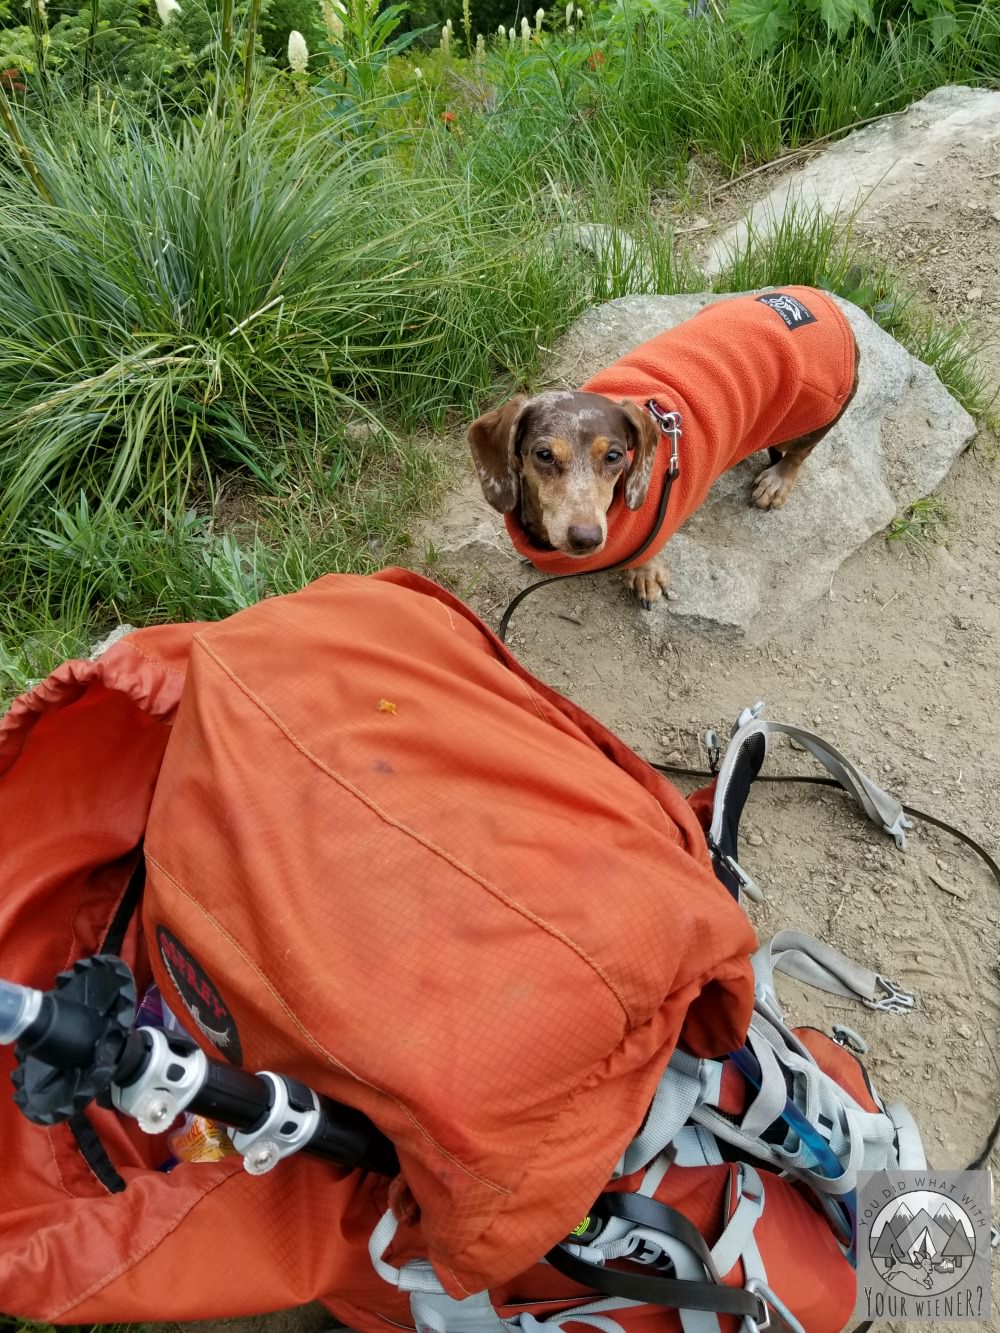 Dachshunds make great adventure and hiking companions